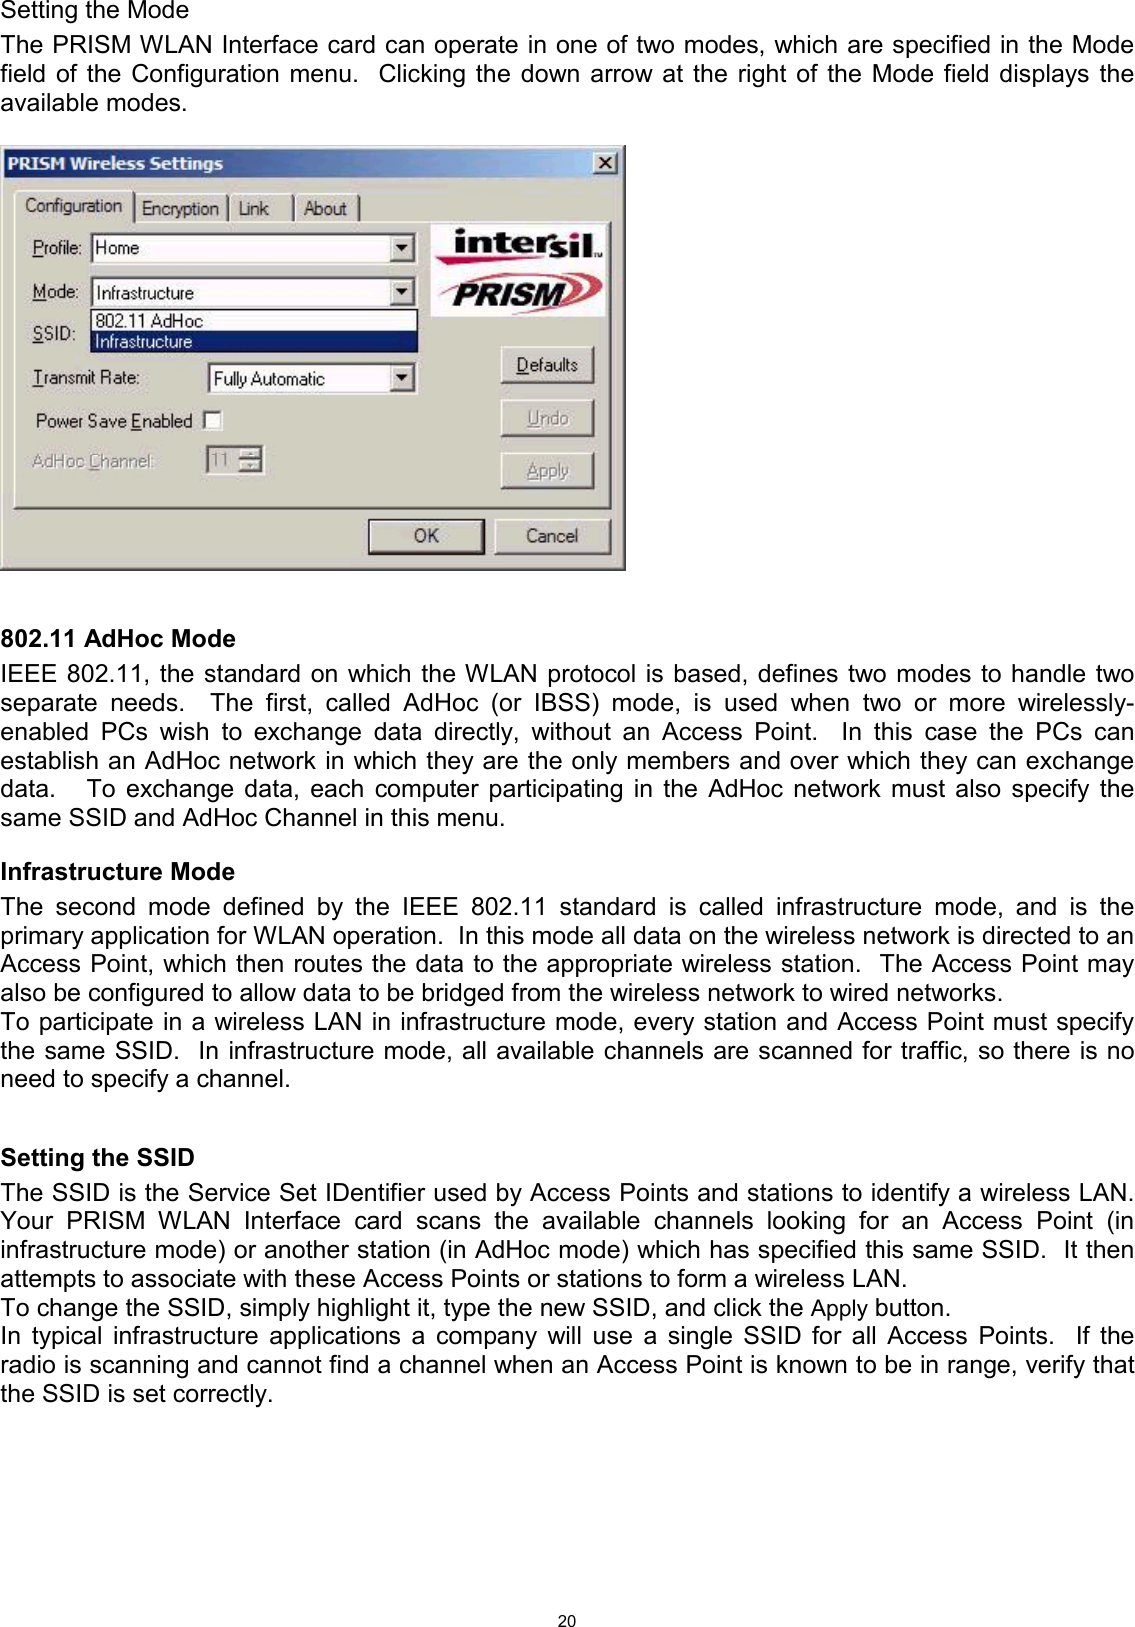  20Setting the Mode The PRISM WLAN Interface card can operate in one of two modes, which are specified in the Mode field of the Configuration menu.  Clicking the down arrow at the right of the Mode field displays the available modes.     802.11 AdHoc Mode IEEE 802.11, the standard on which the WLAN protocol is based, defines two modes to handle two separate needs.  The first, called AdHoc (or IBSS) mode, is used when two or more wirelessly-enabled PCs wish to exchange data directly, without an Access Point.  In this case the PCs can establish an AdHoc network in which they are the only members and over which they can exchange data.   To exchange data, each computer participating in the AdHoc network must also specify the same SSID and AdHoc Channel in this menu.   Infrastructure Mode The second mode defined by the IEEE 802.11 standard is called infrastructure mode, and is the primary application for WLAN operation.  In this mode all data on the wireless network is directed to an Access Point, which then routes the data to the appropriate wireless station.  The Access Point may also be configured to allow data to be bridged from the wireless network to wired networks.   To participate in a wireless LAN in infrastructure mode, every station and Access Point must specify the same SSID.  In infrastructure mode, all available channels are scanned for traffic, so there is no need to specify a channel.  Setting the SSID The SSID is the Service Set IDentifier used by Access Points and stations to identify a wireless LAN.  Your PRISM WLAN Interface card scans the available channels looking for an Access Point (in infrastructure mode) or another station (in AdHoc mode) which has specified this same SSID.  It then attempts to associate with these Access Points or stations to form a wireless LAN. To change the SSID, simply highlight it, type the new SSID, and click the Apply button. In typical infrastructure applications a company will use a single SSID for all Access Points.  If the radio is scanning and cannot find a channel when an Access Point is known to be in range, verify that the SSID is set correctly.        